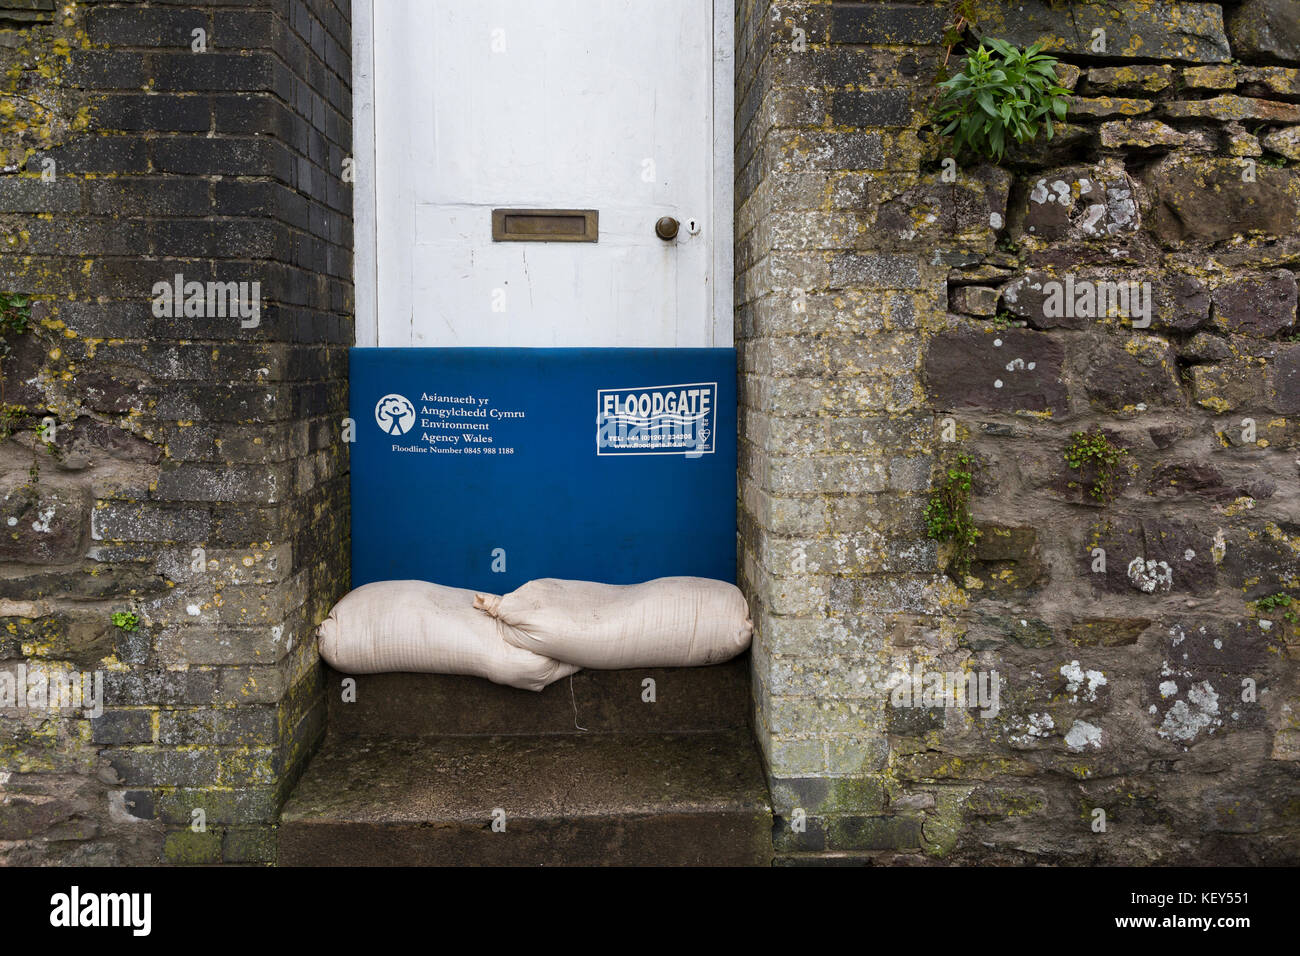 Floodgate flood prevention gate / measure in front of a door with sandbags Stock Photo